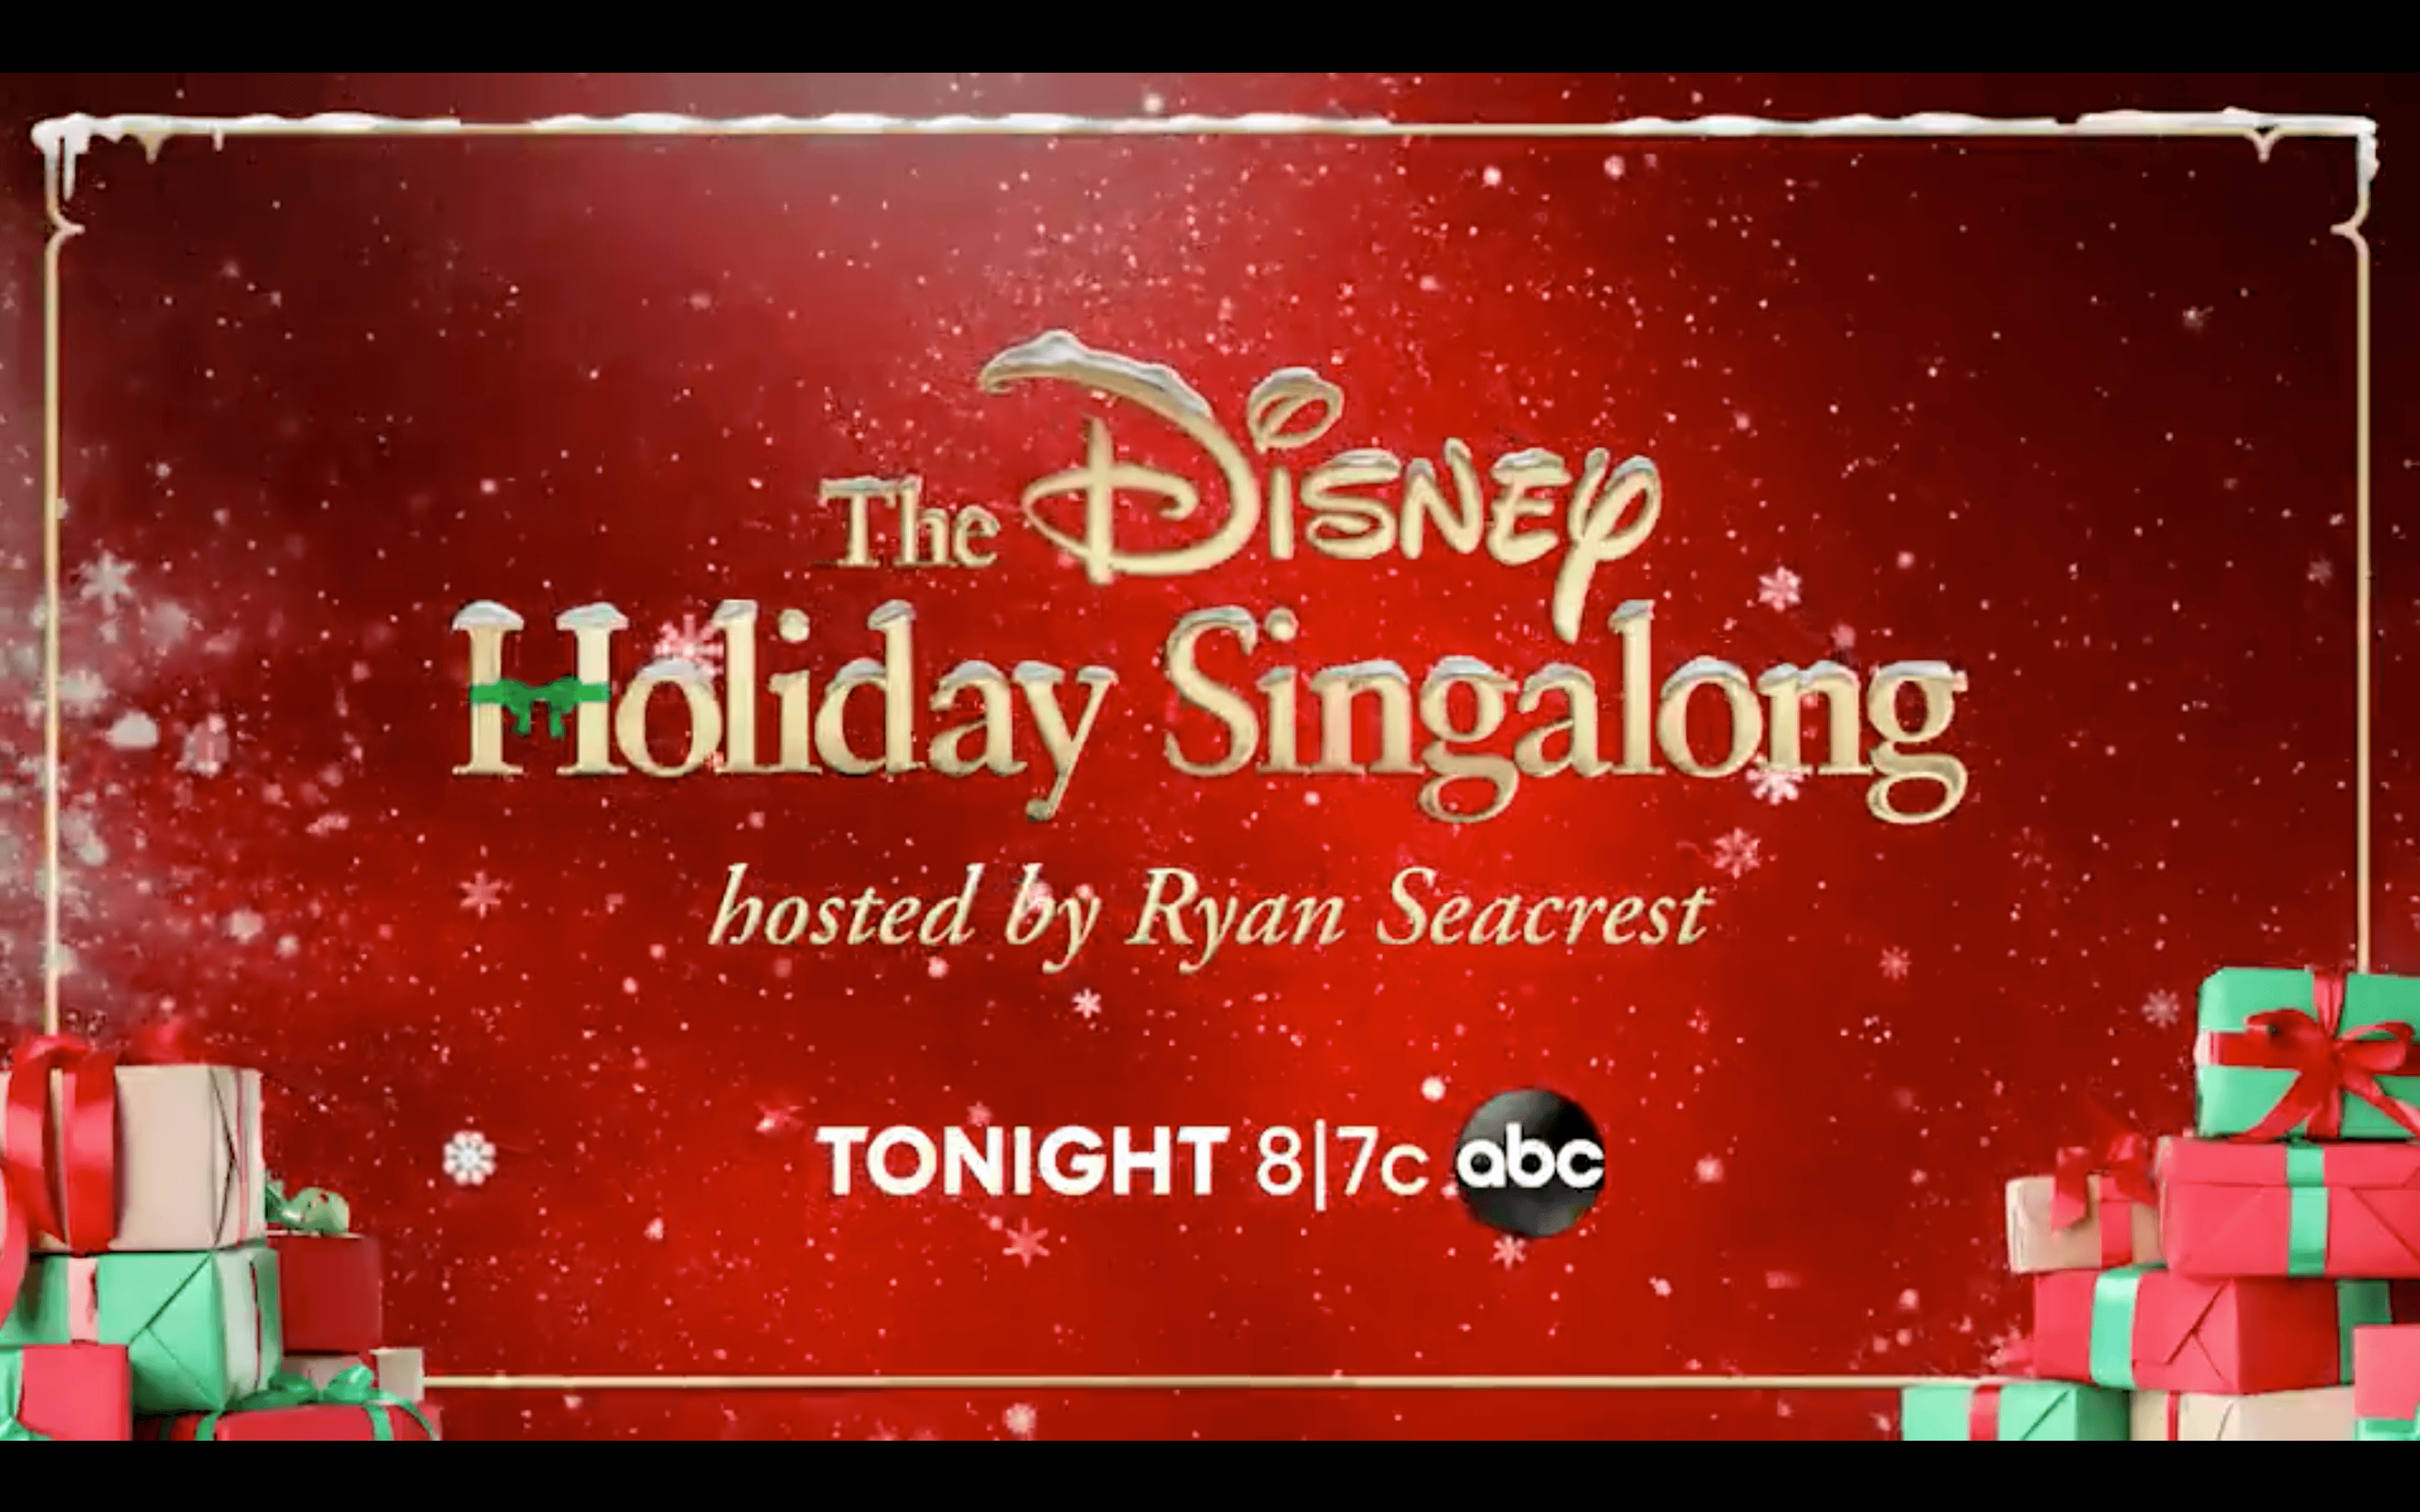 How to Watch the Disney Holiday Singalong Tonight on Roku, Fire TV, Apple TV & More